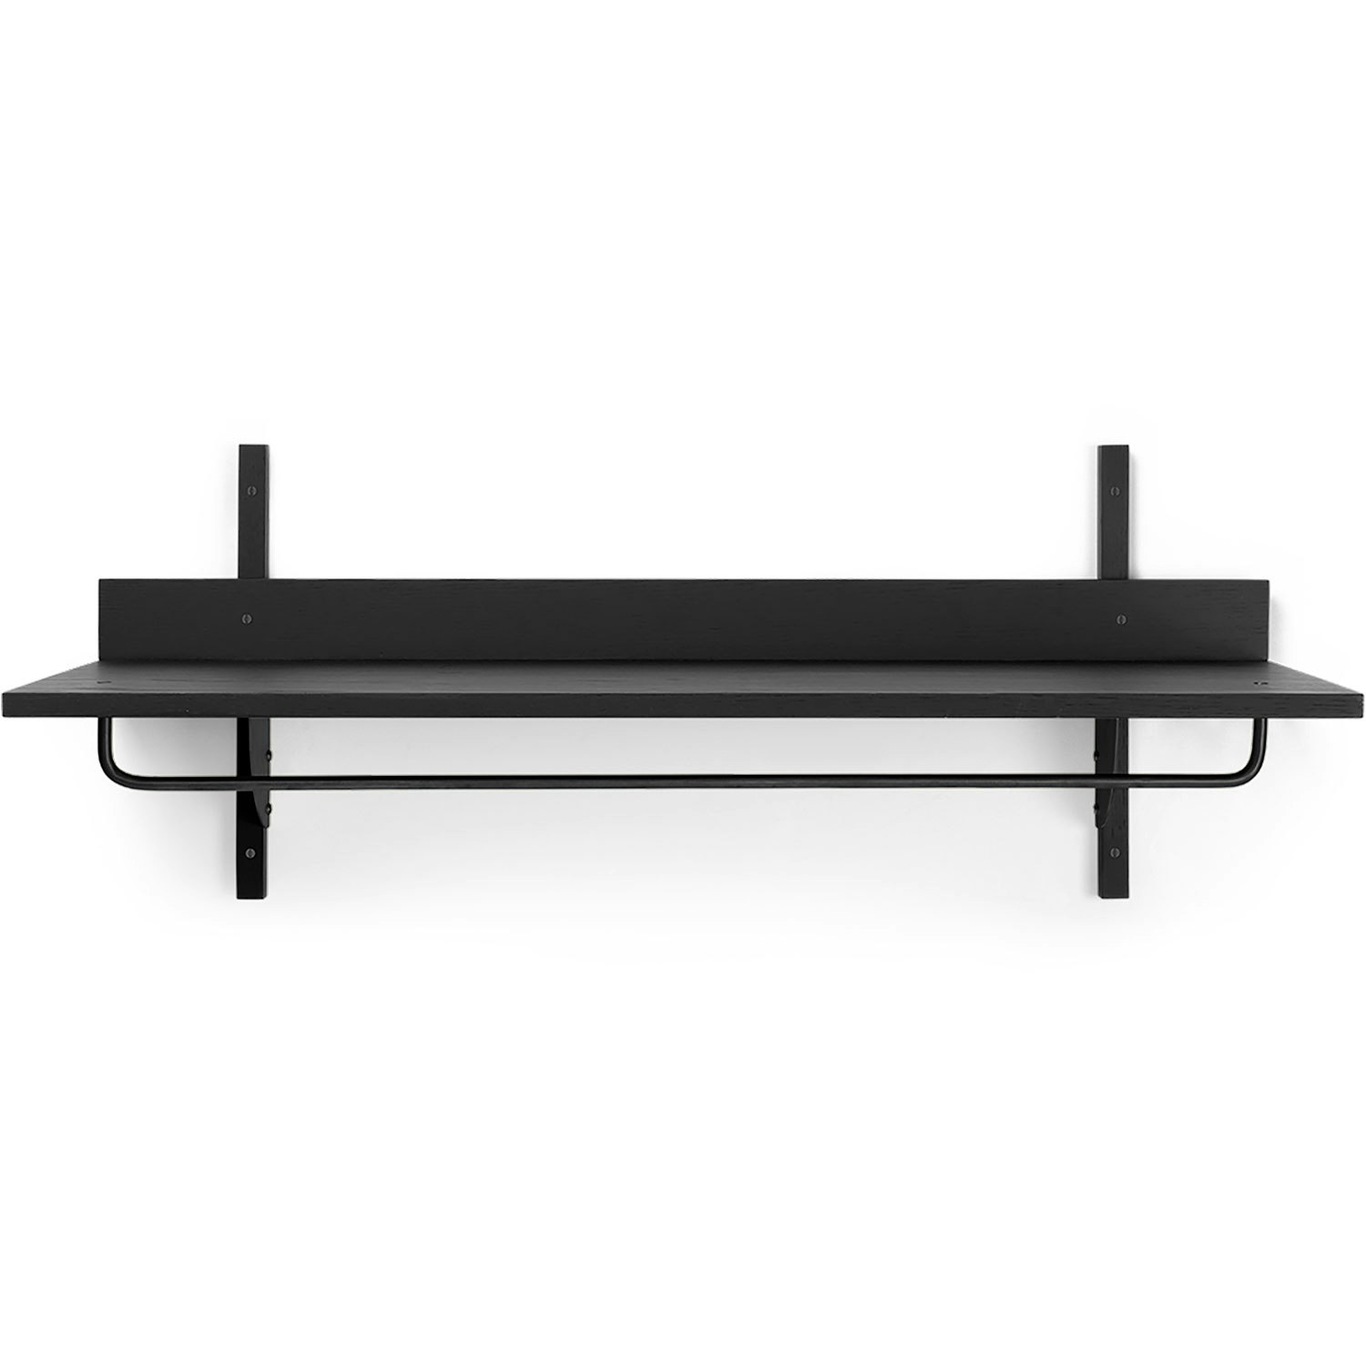 Sector Shelf With Cloth Rod, Black stained Ash / Black